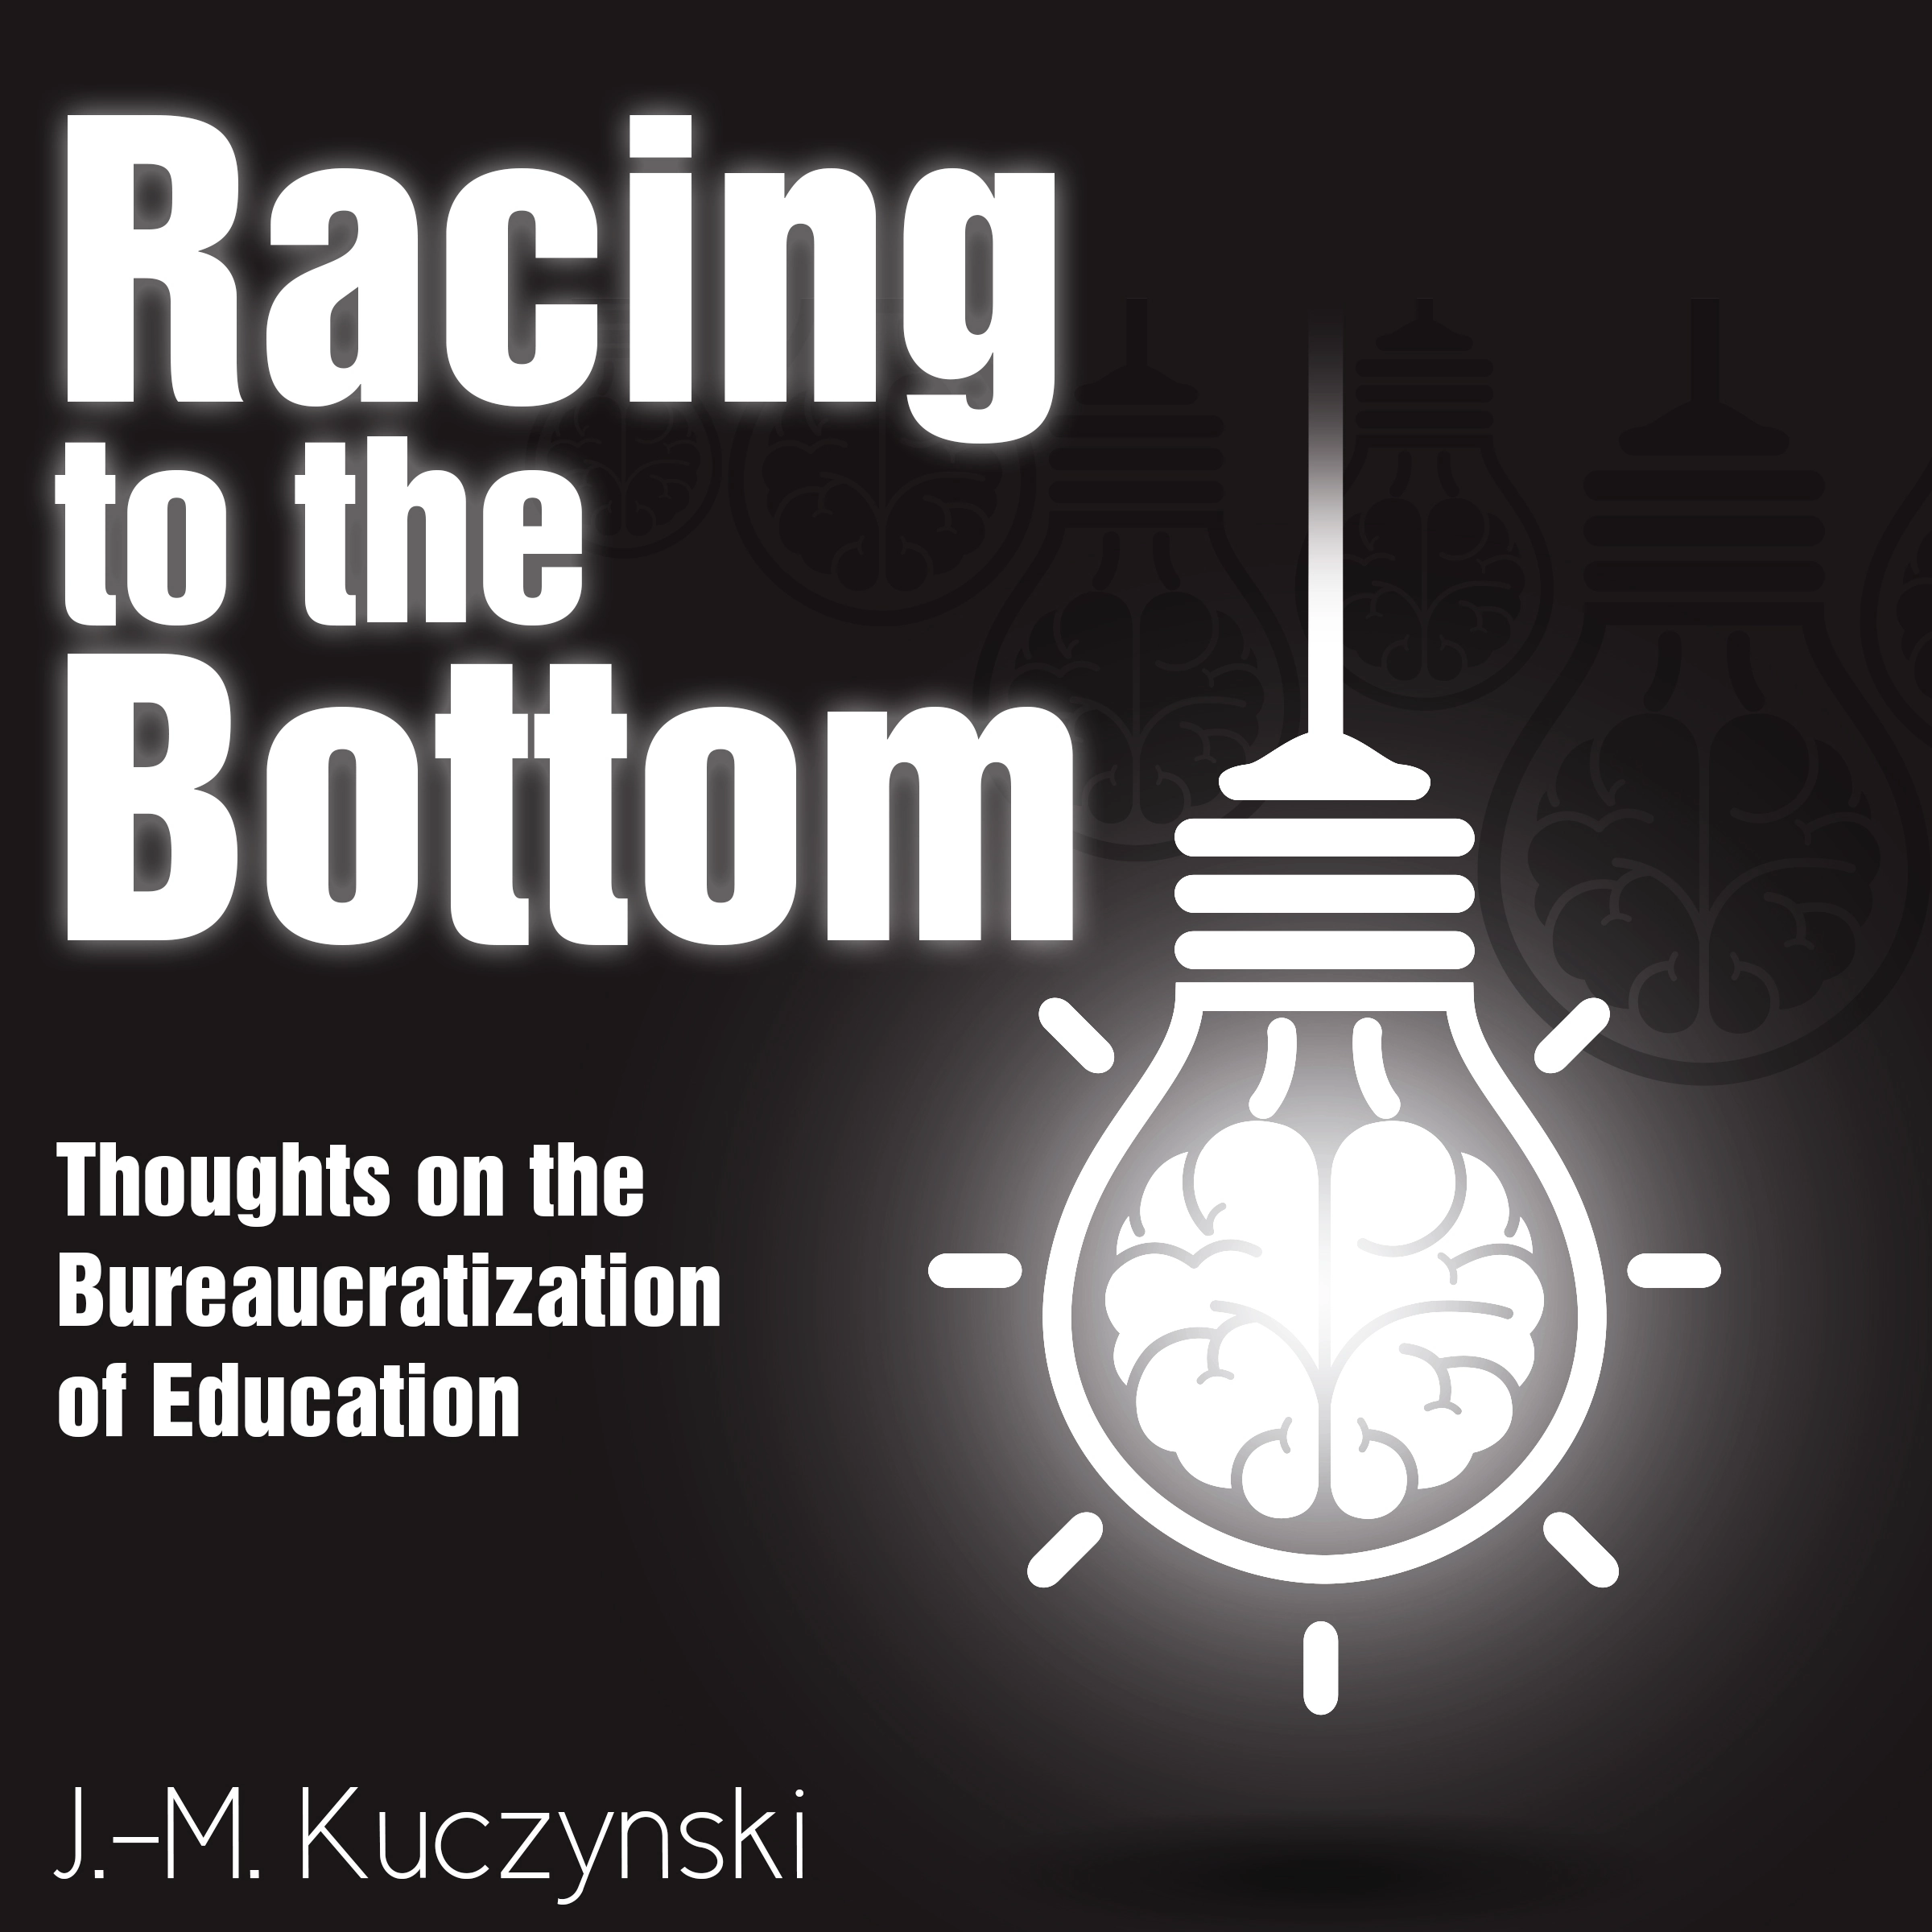 Racing to the Bottom: Thoughts on the Bureaucratization of Education Audiobook by J.-M. Kuczynski